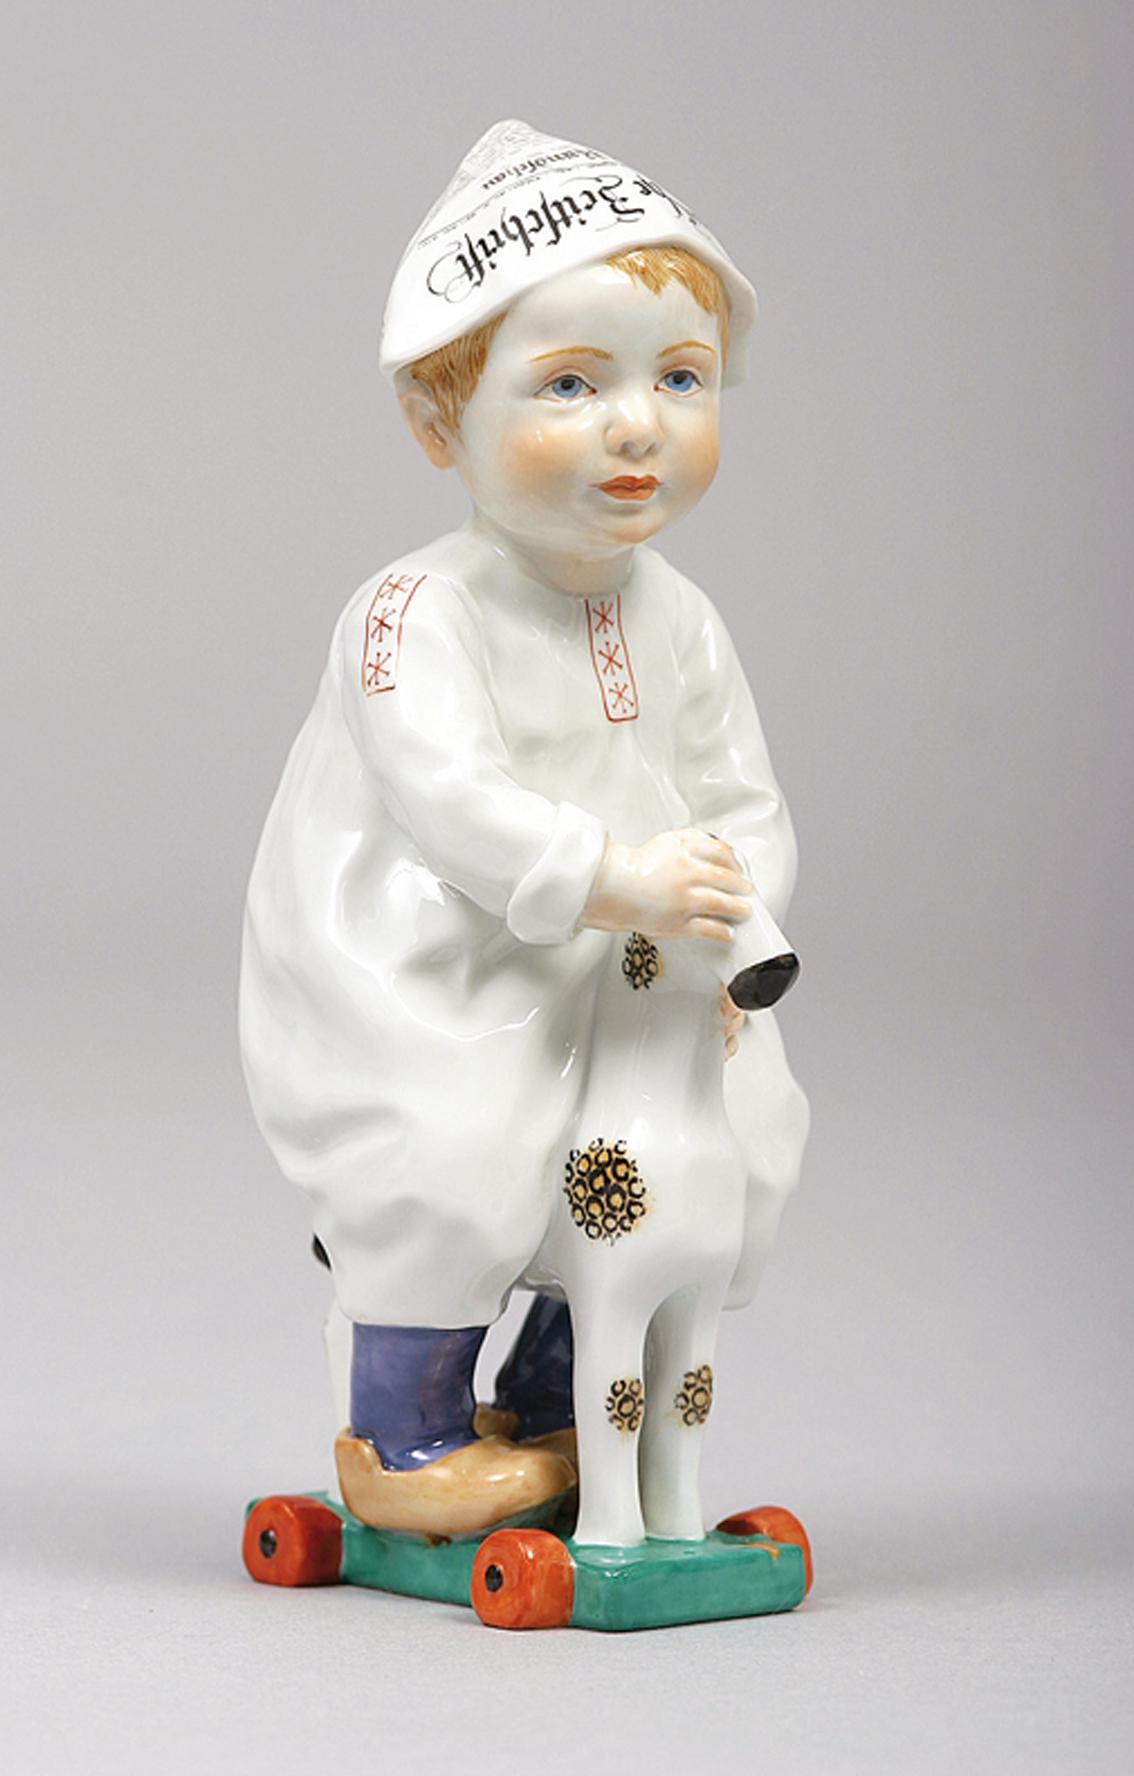 A figure of a Hentschel child 'boy with newsletter cap ridig a wooden horse